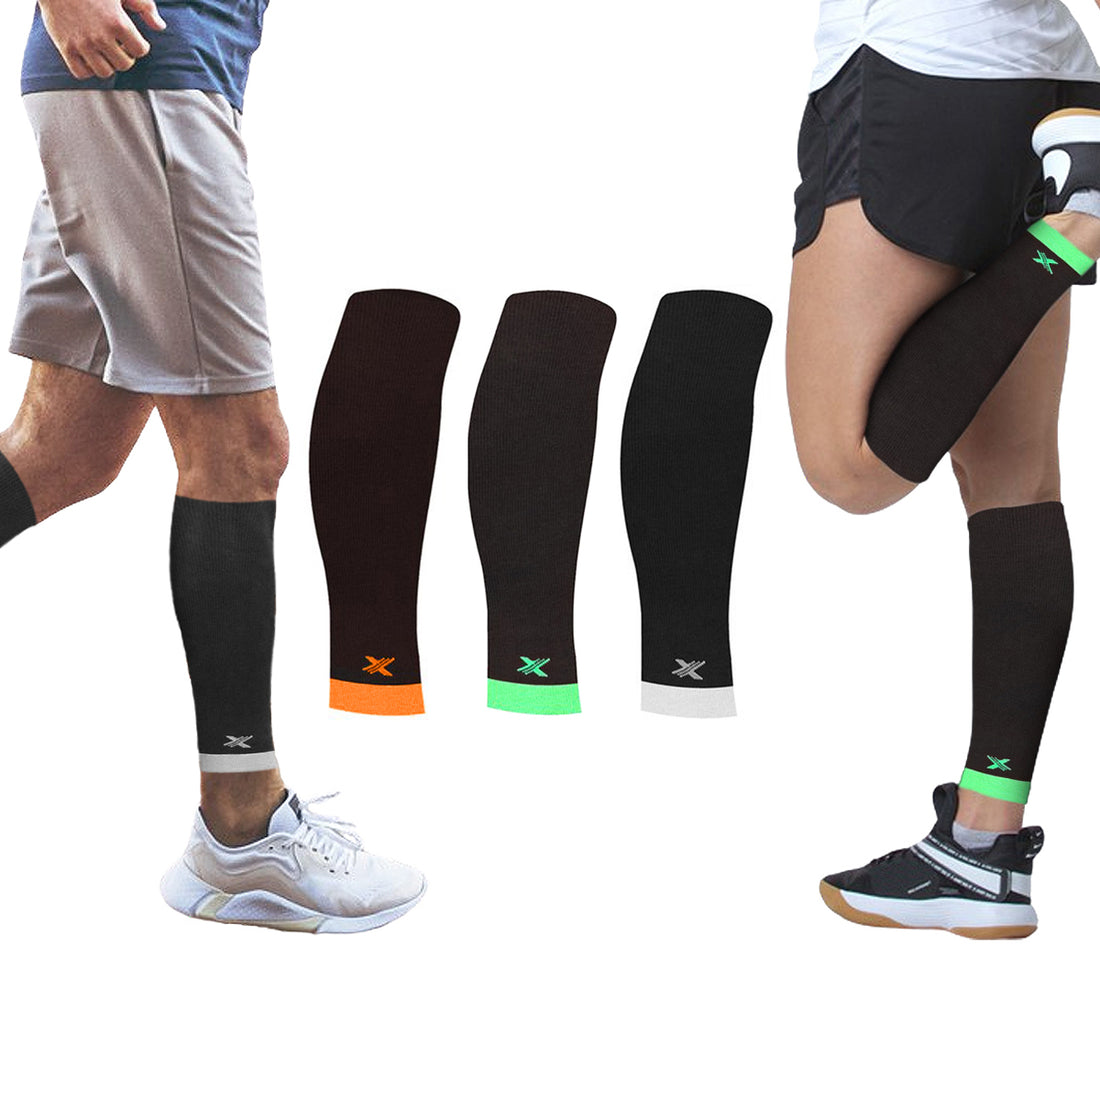 3-Pairs: Elite Lightweight Support Relief Calf Compression Sleeves